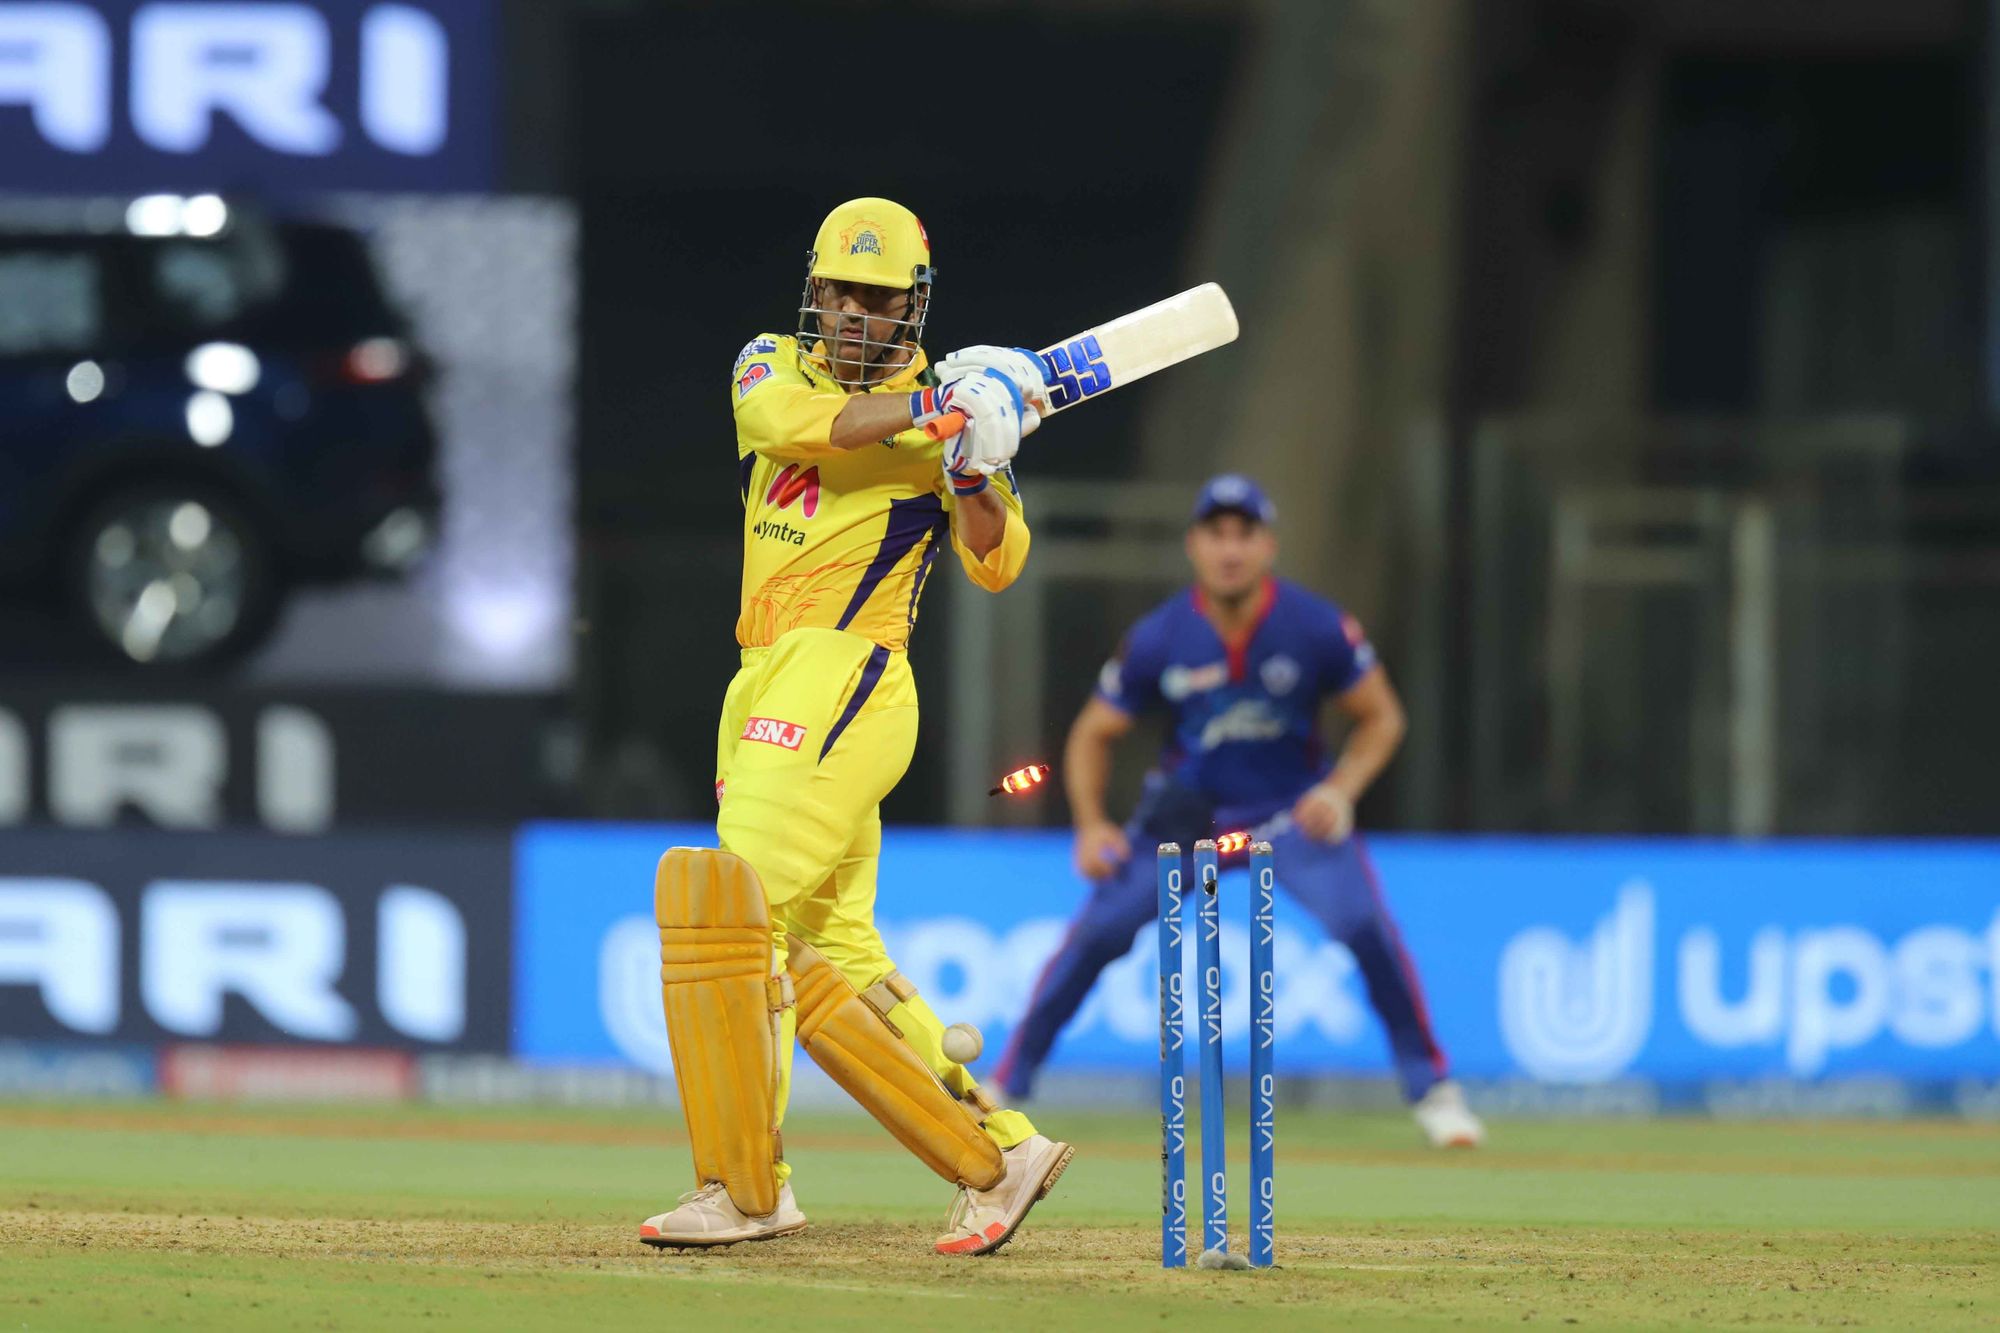 MS Dhoni scored duck in the match against DC | BCCI/IPL